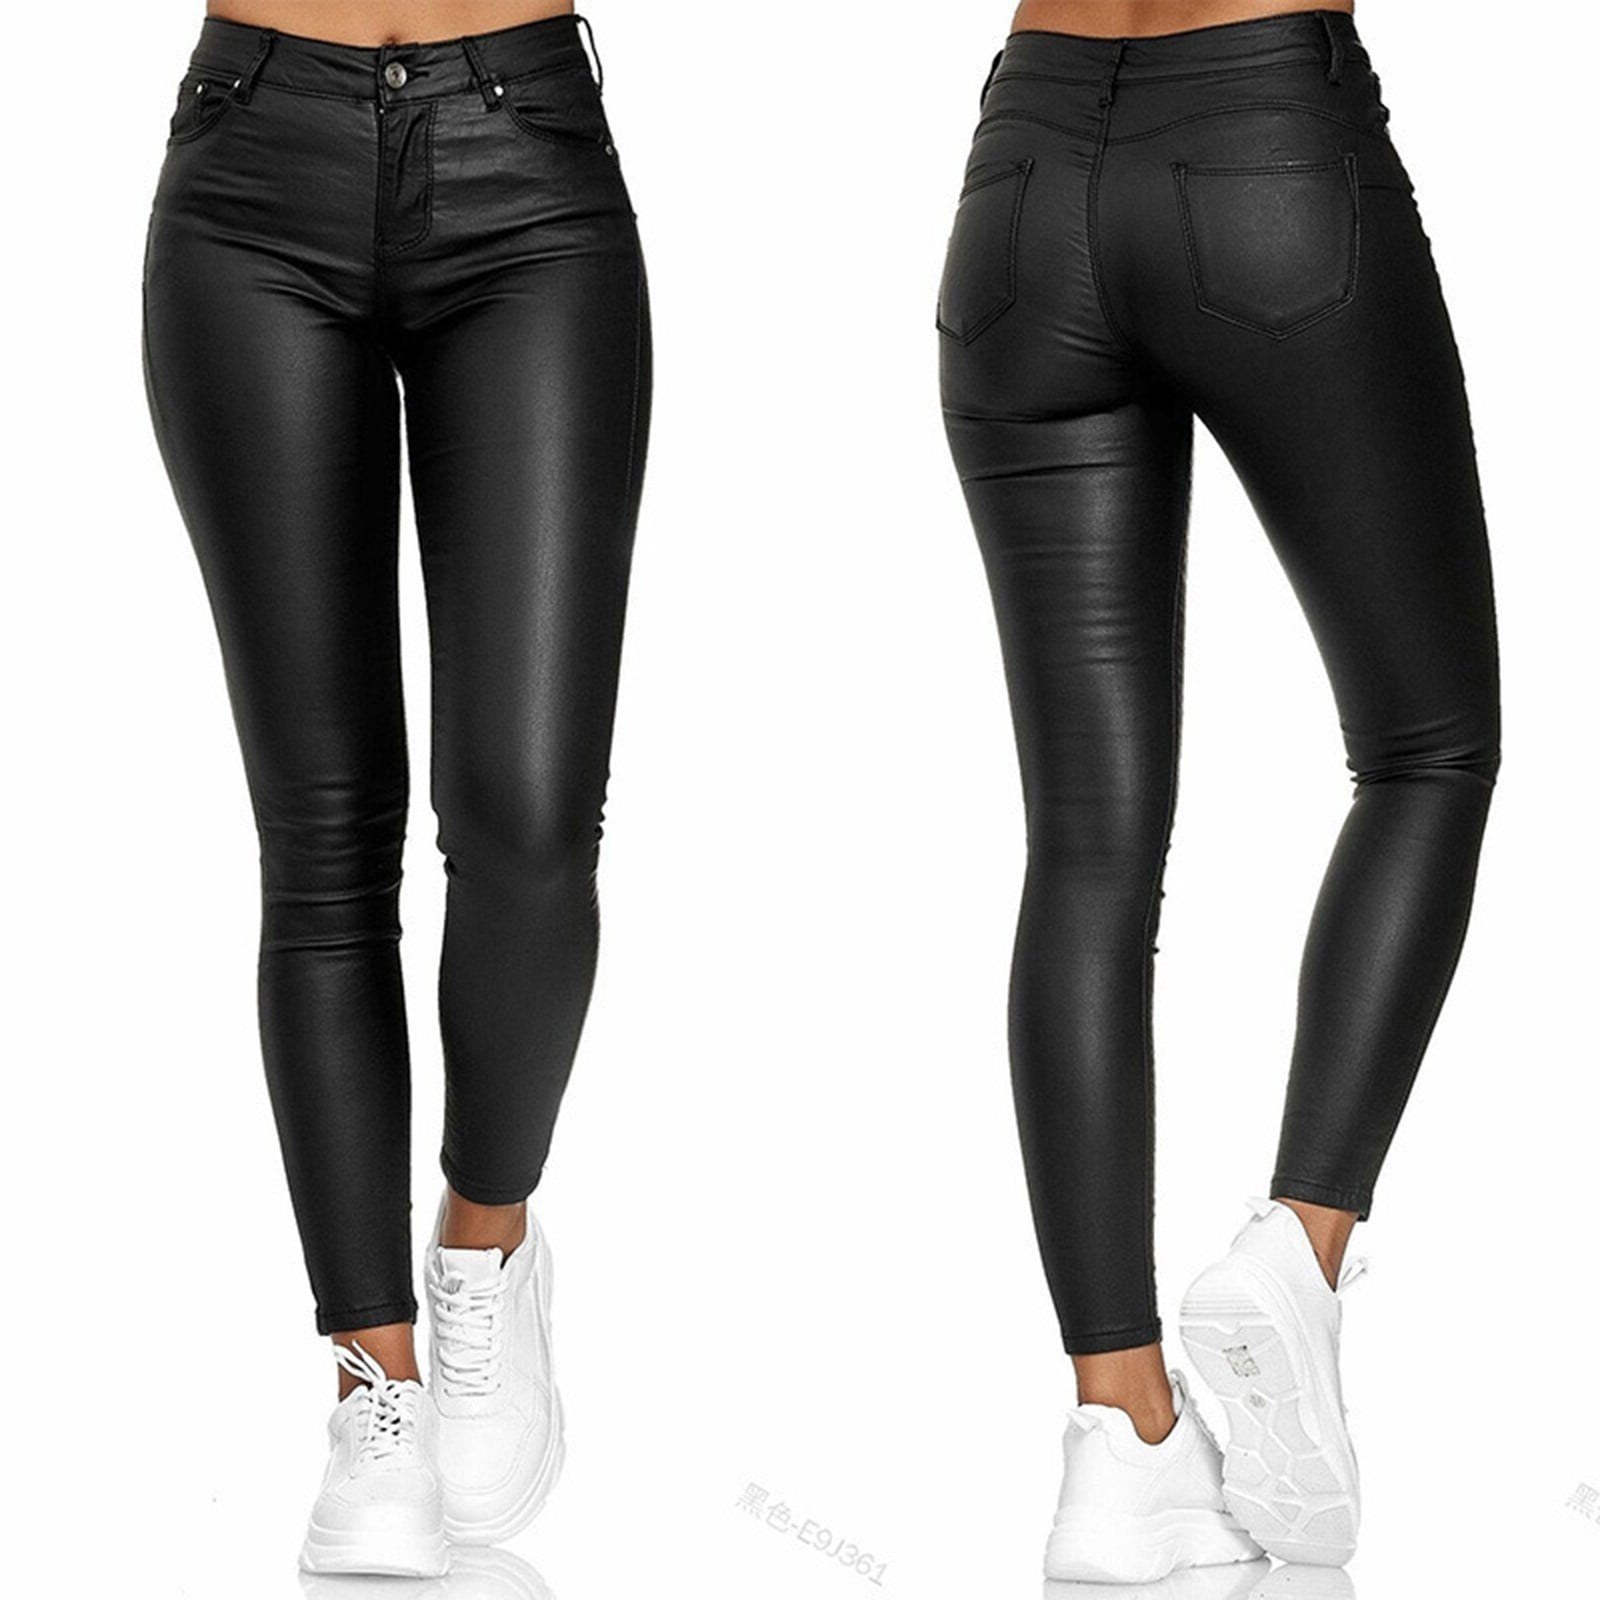 Women's Faux Leather Naked Feeling Workout Leggings 25 Inches - 7/8 Soft  Tummy Control Butt-Lifting High Waist Yoga Tight